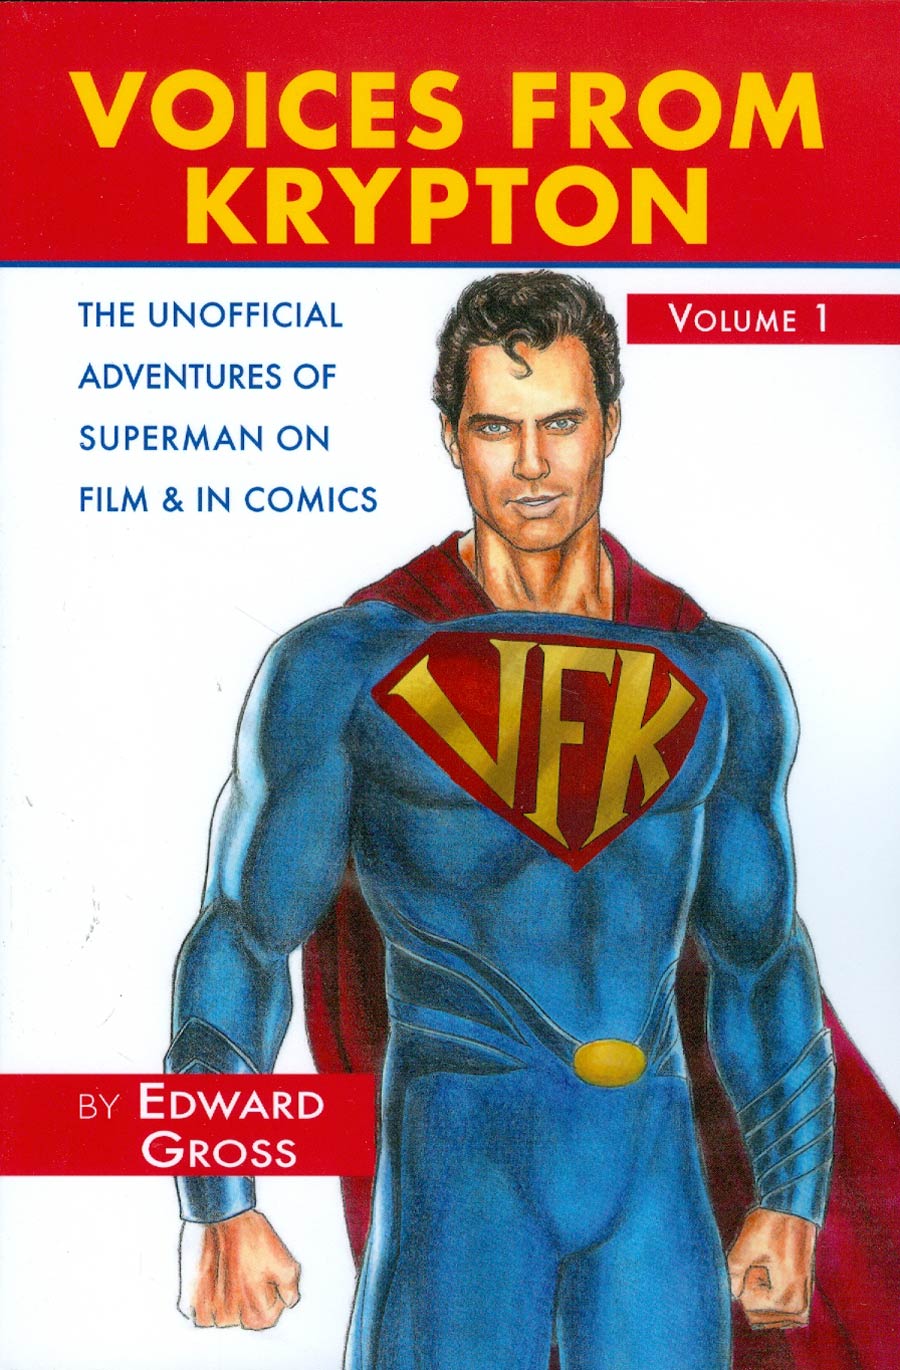 Voices From Krypton Vol 1 Unofficial Adventures Of Superman On Film & In Comics SC